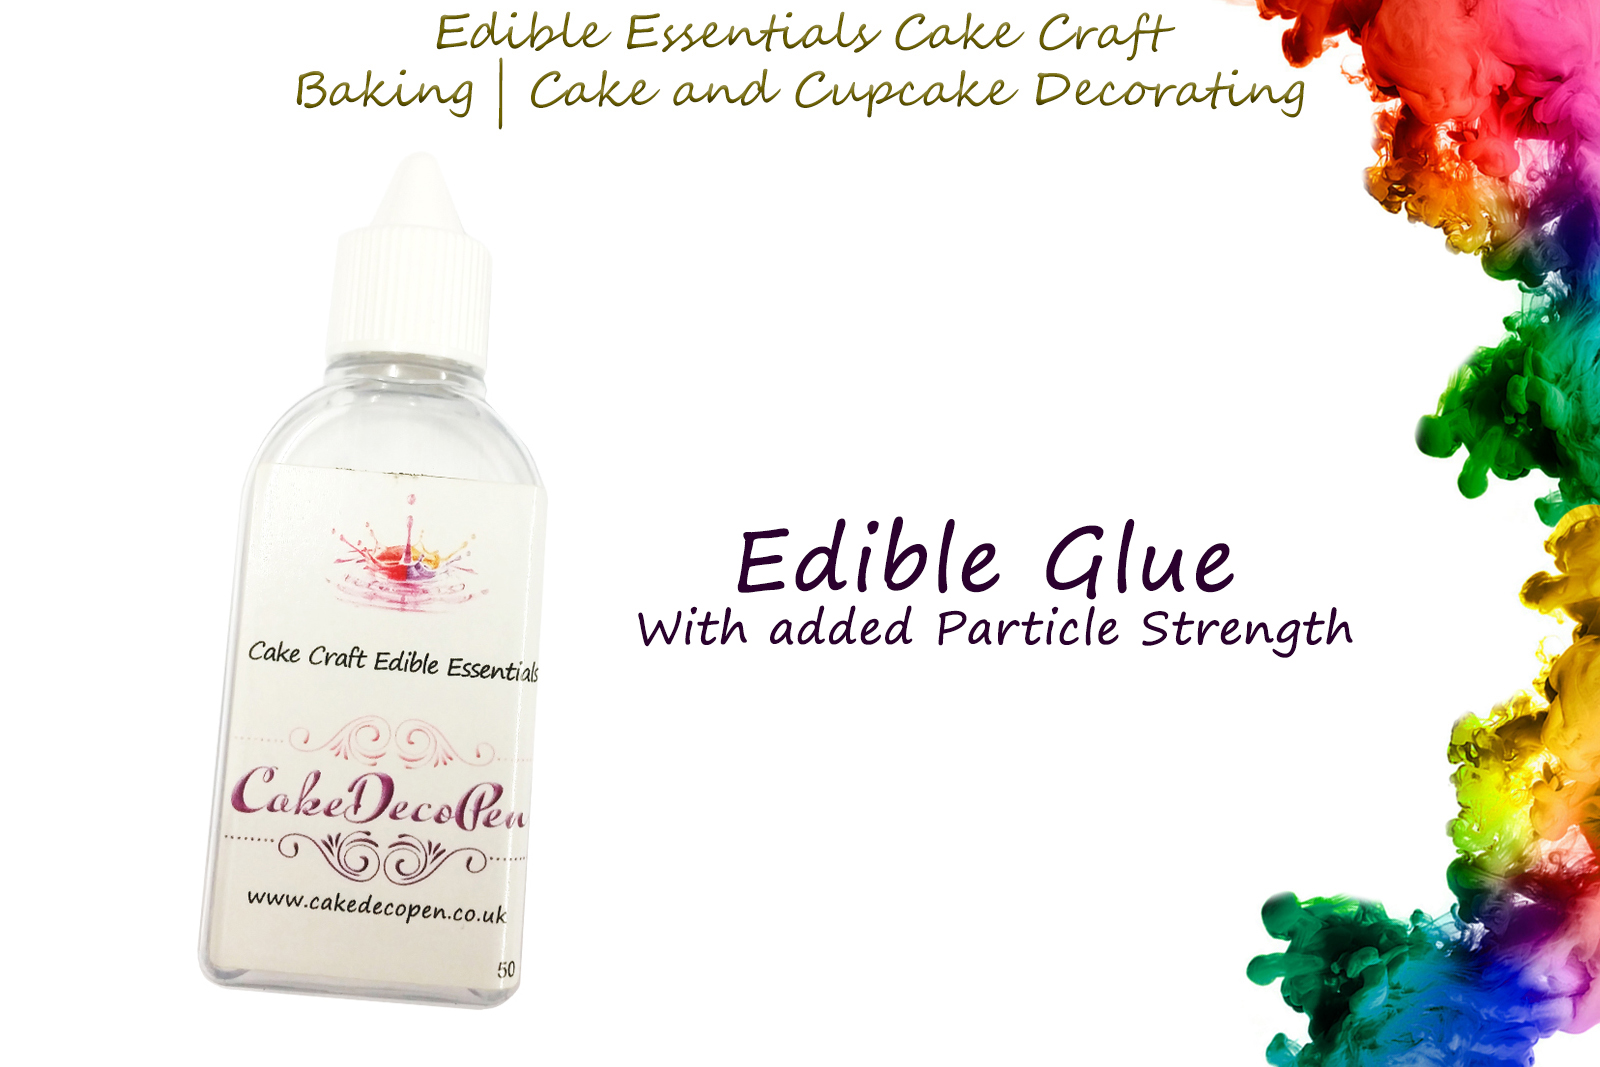 Edible Glue | 50 grams | Edible Essentials Baking and Cake Decorating Craft | Great Christmas Bake Off